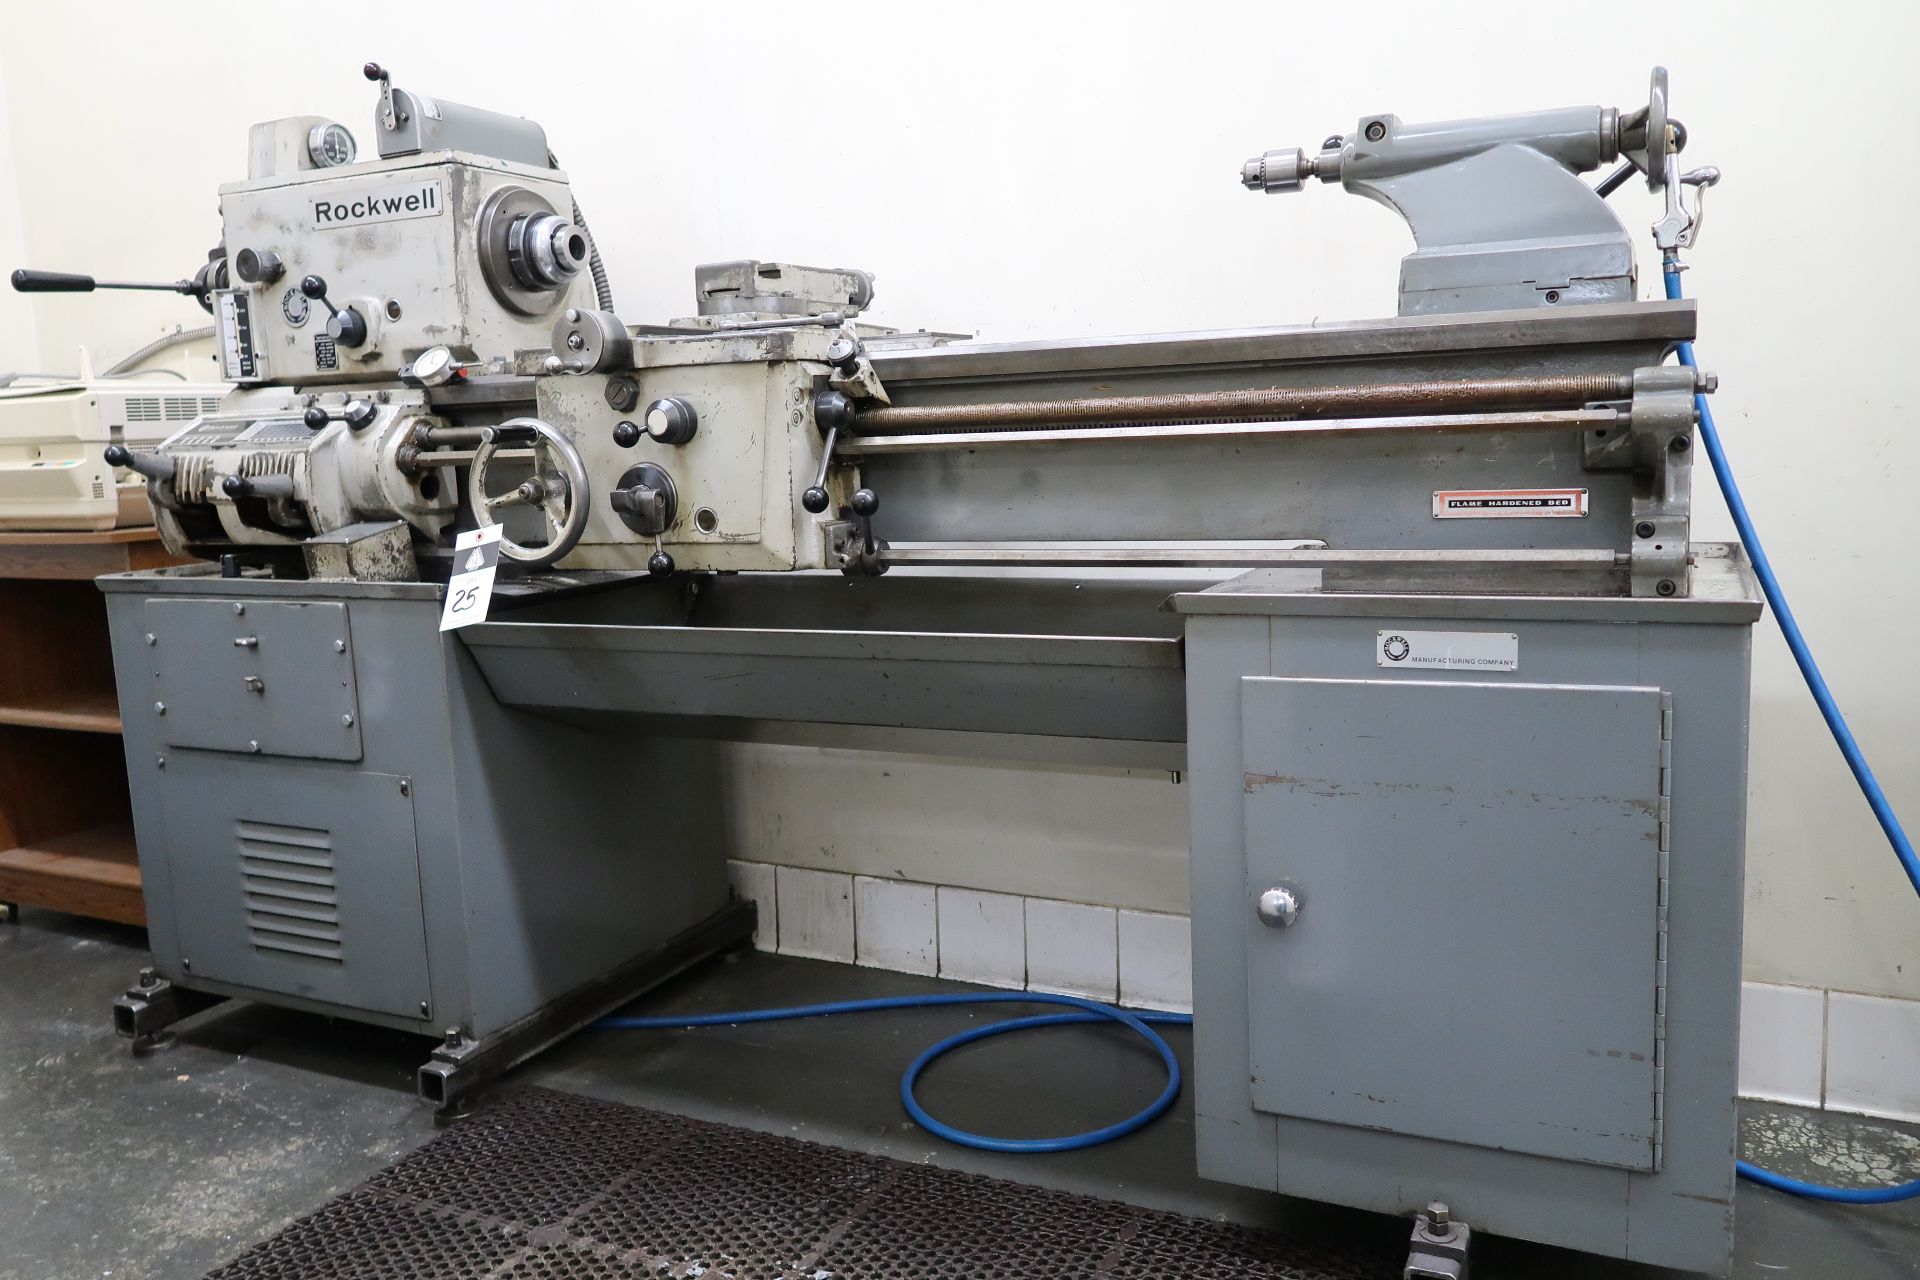 Rockwell “Delta 14” 14” x 45” Lathe s/n 1403561 w 40-1600 Adjustable RPM, (SOLD AS IS)